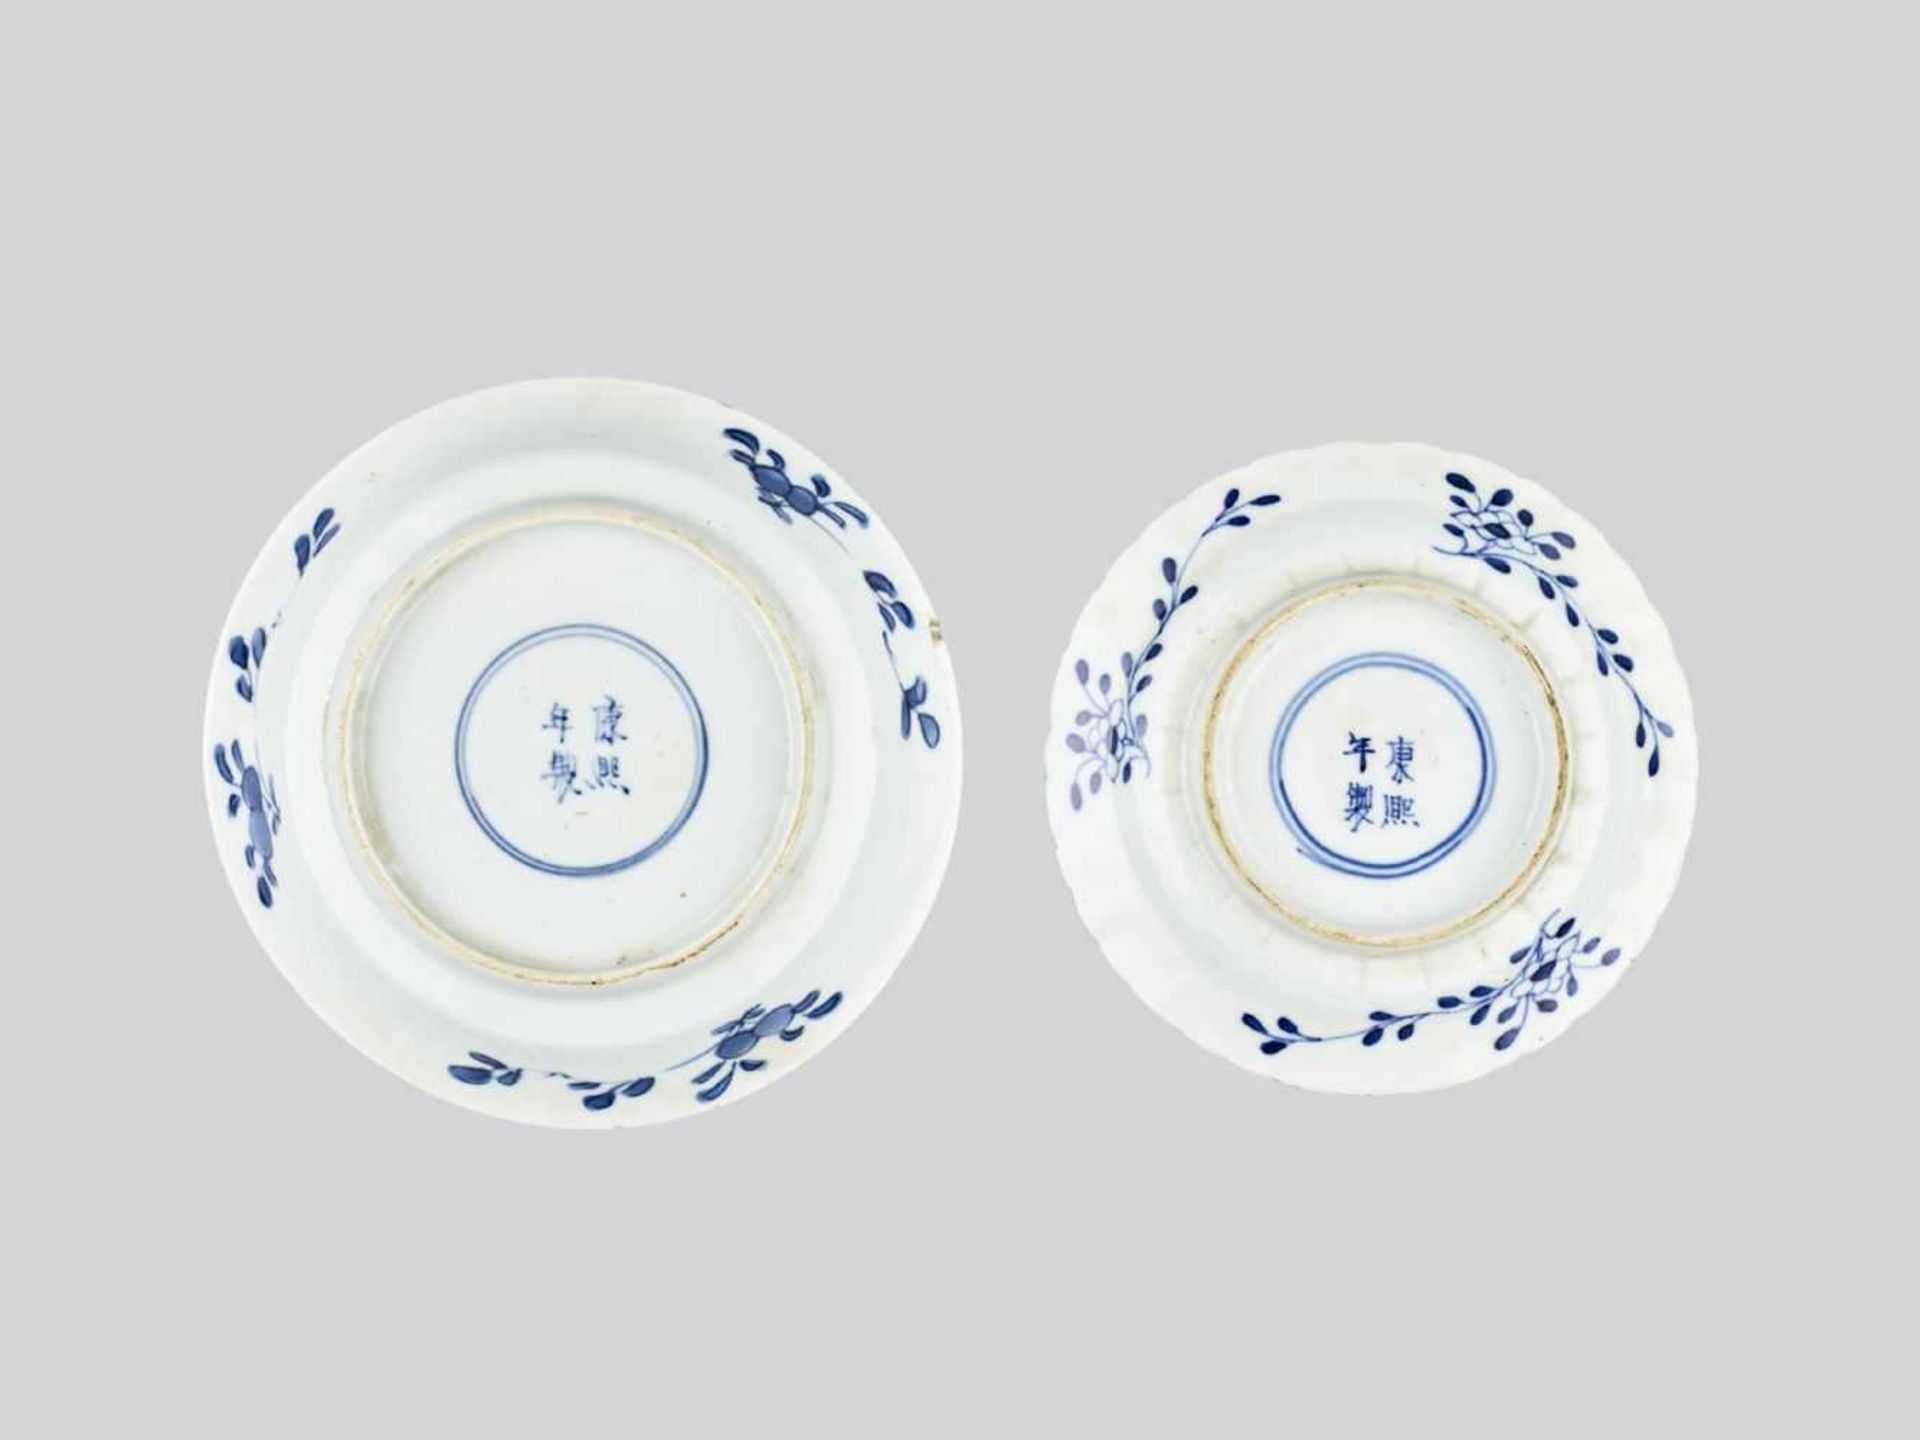 TWO SMALL BLUE AND WHITE GLAZED PORCELAIN DISHES, KANGXI MARK AND PERIOD - Image 2 of 6